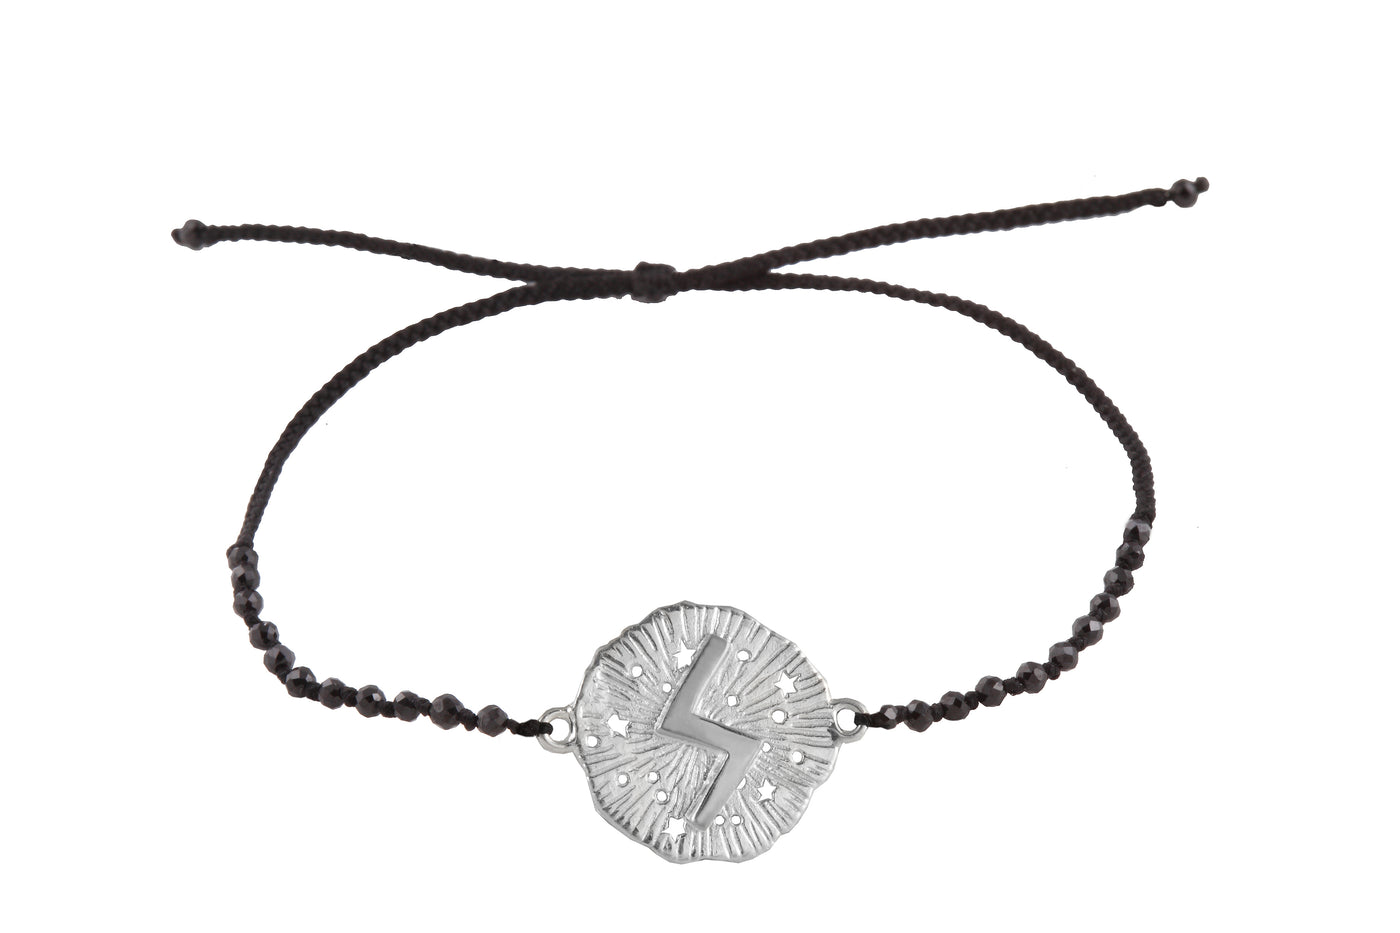 Runic medallion amulet Soulo bracelet with beads. Silver